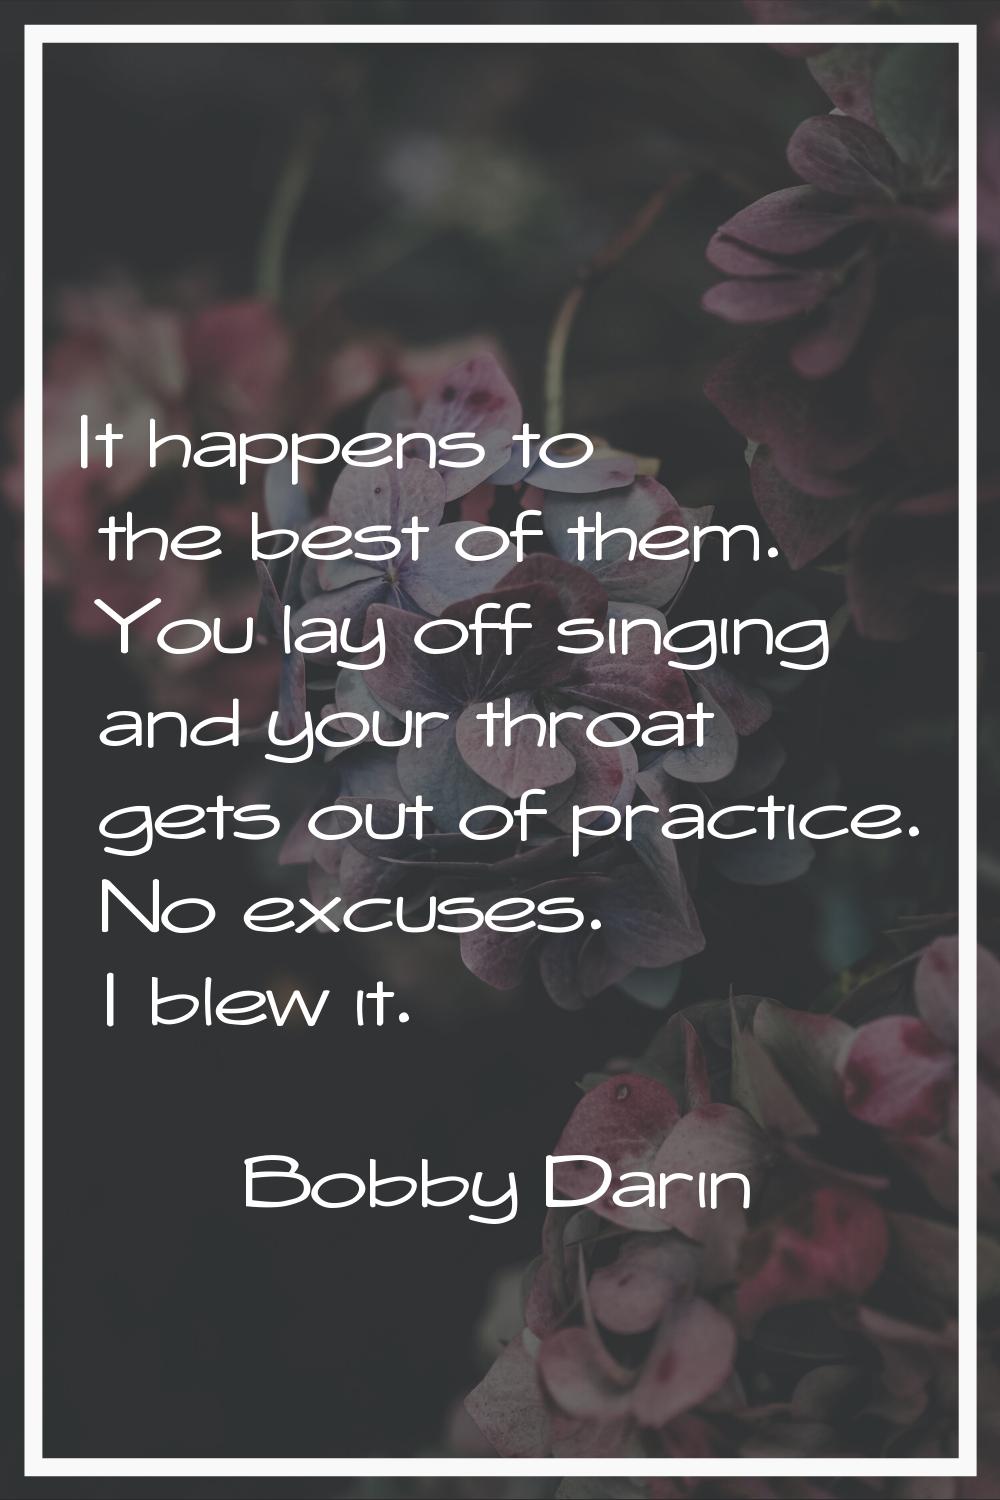 It happens to the best of them. You lay off singing and your throat gets out of practice. No excuse